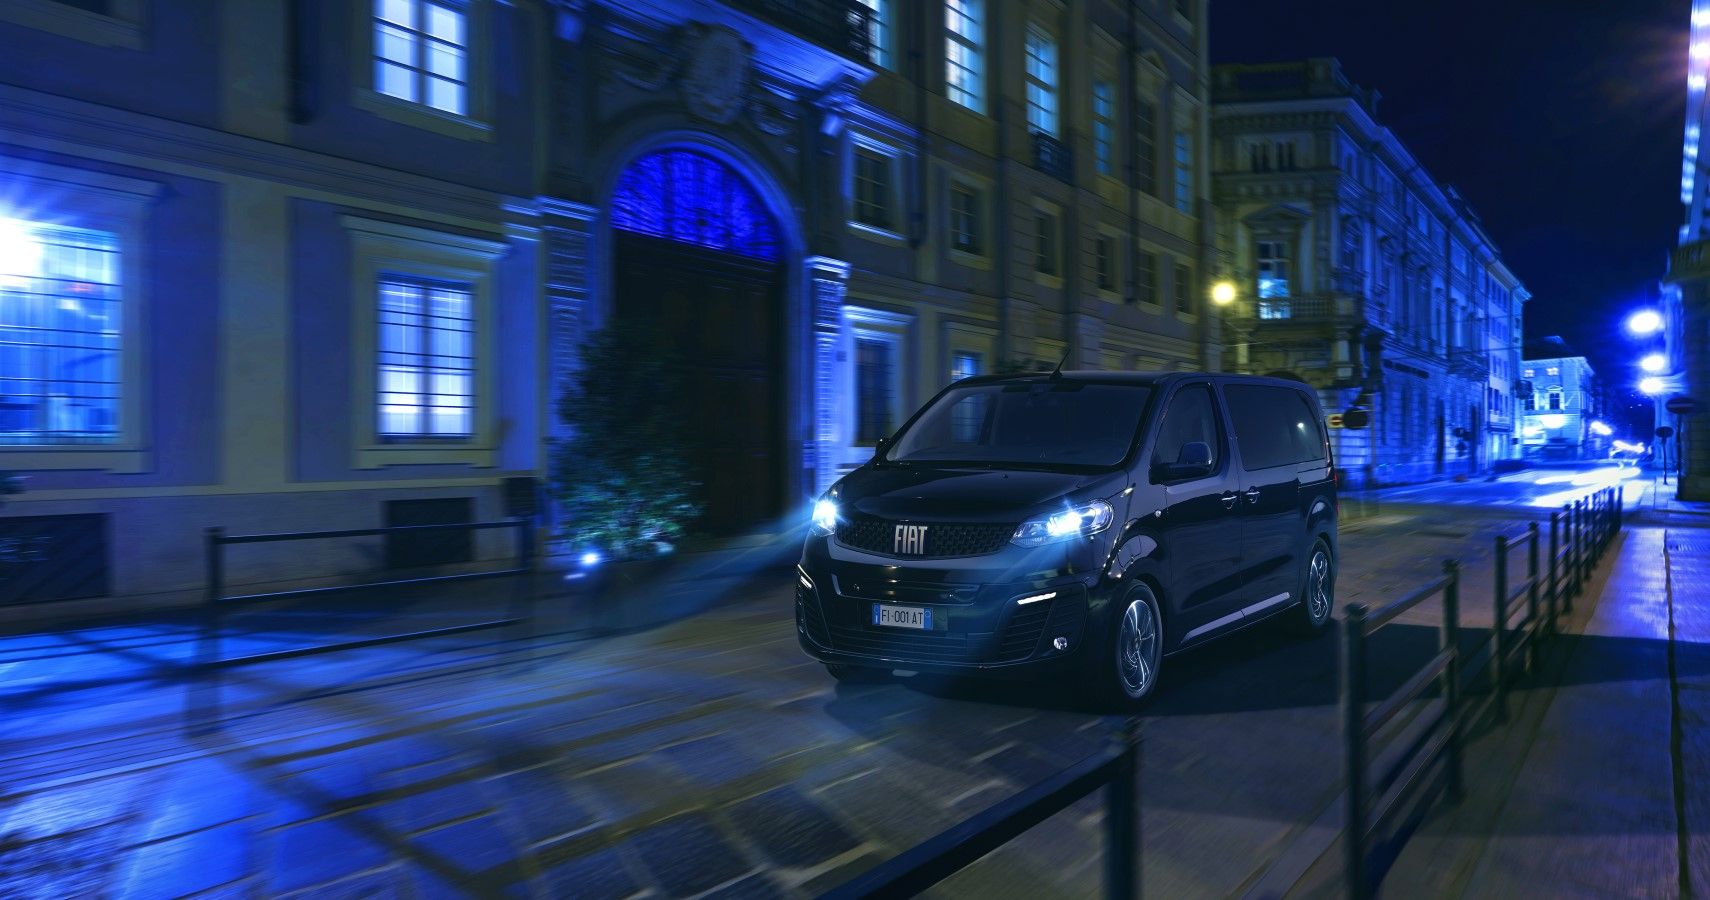 2022 Fiat E-Ulysse on the streets at night